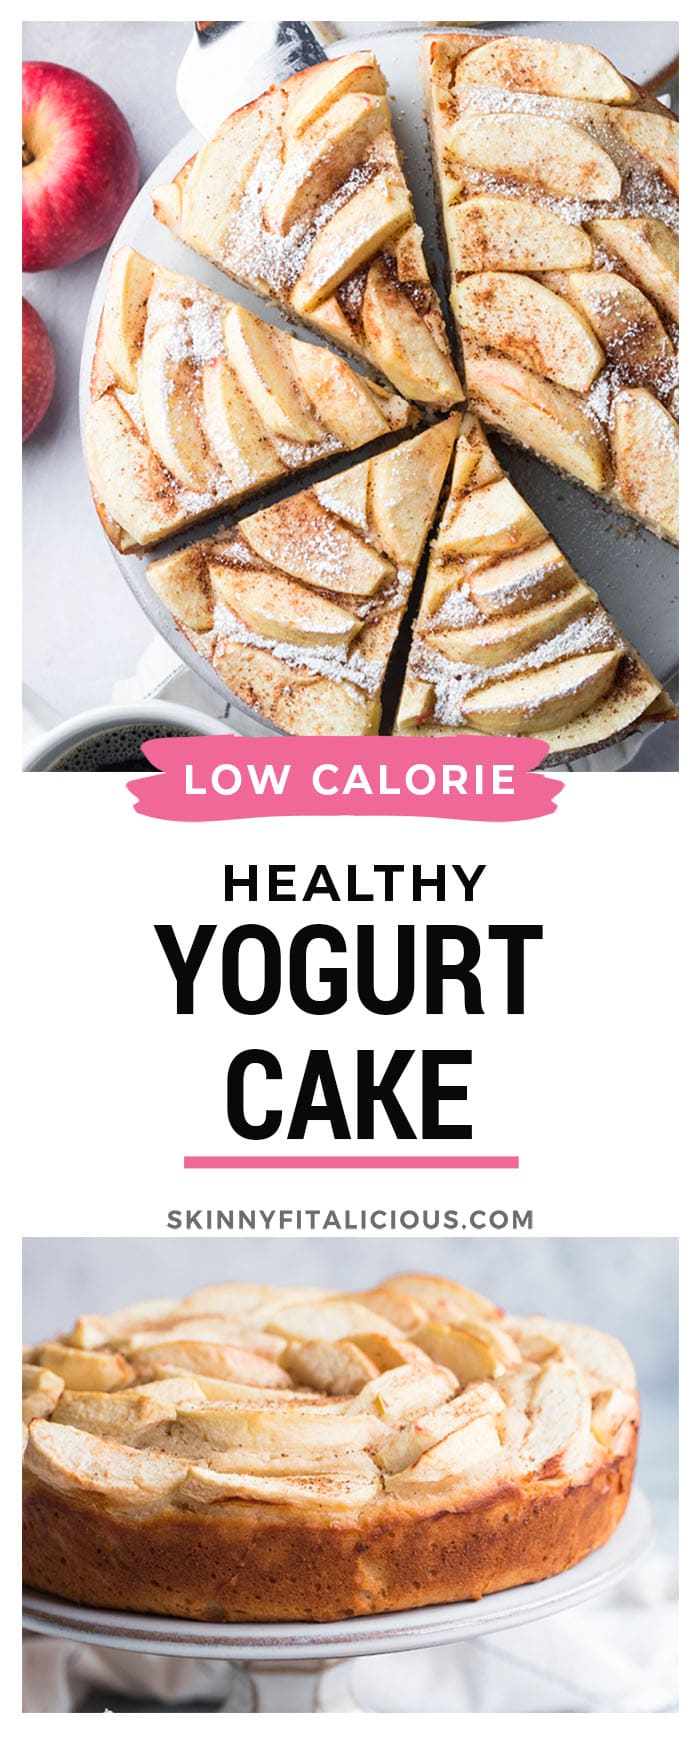 Healthy Greek Yogurt Cake made low calorie and gluten free. Made higher in protein with yogurt and less sugar, this cake is better balanced in nutrition and tastes delicious!